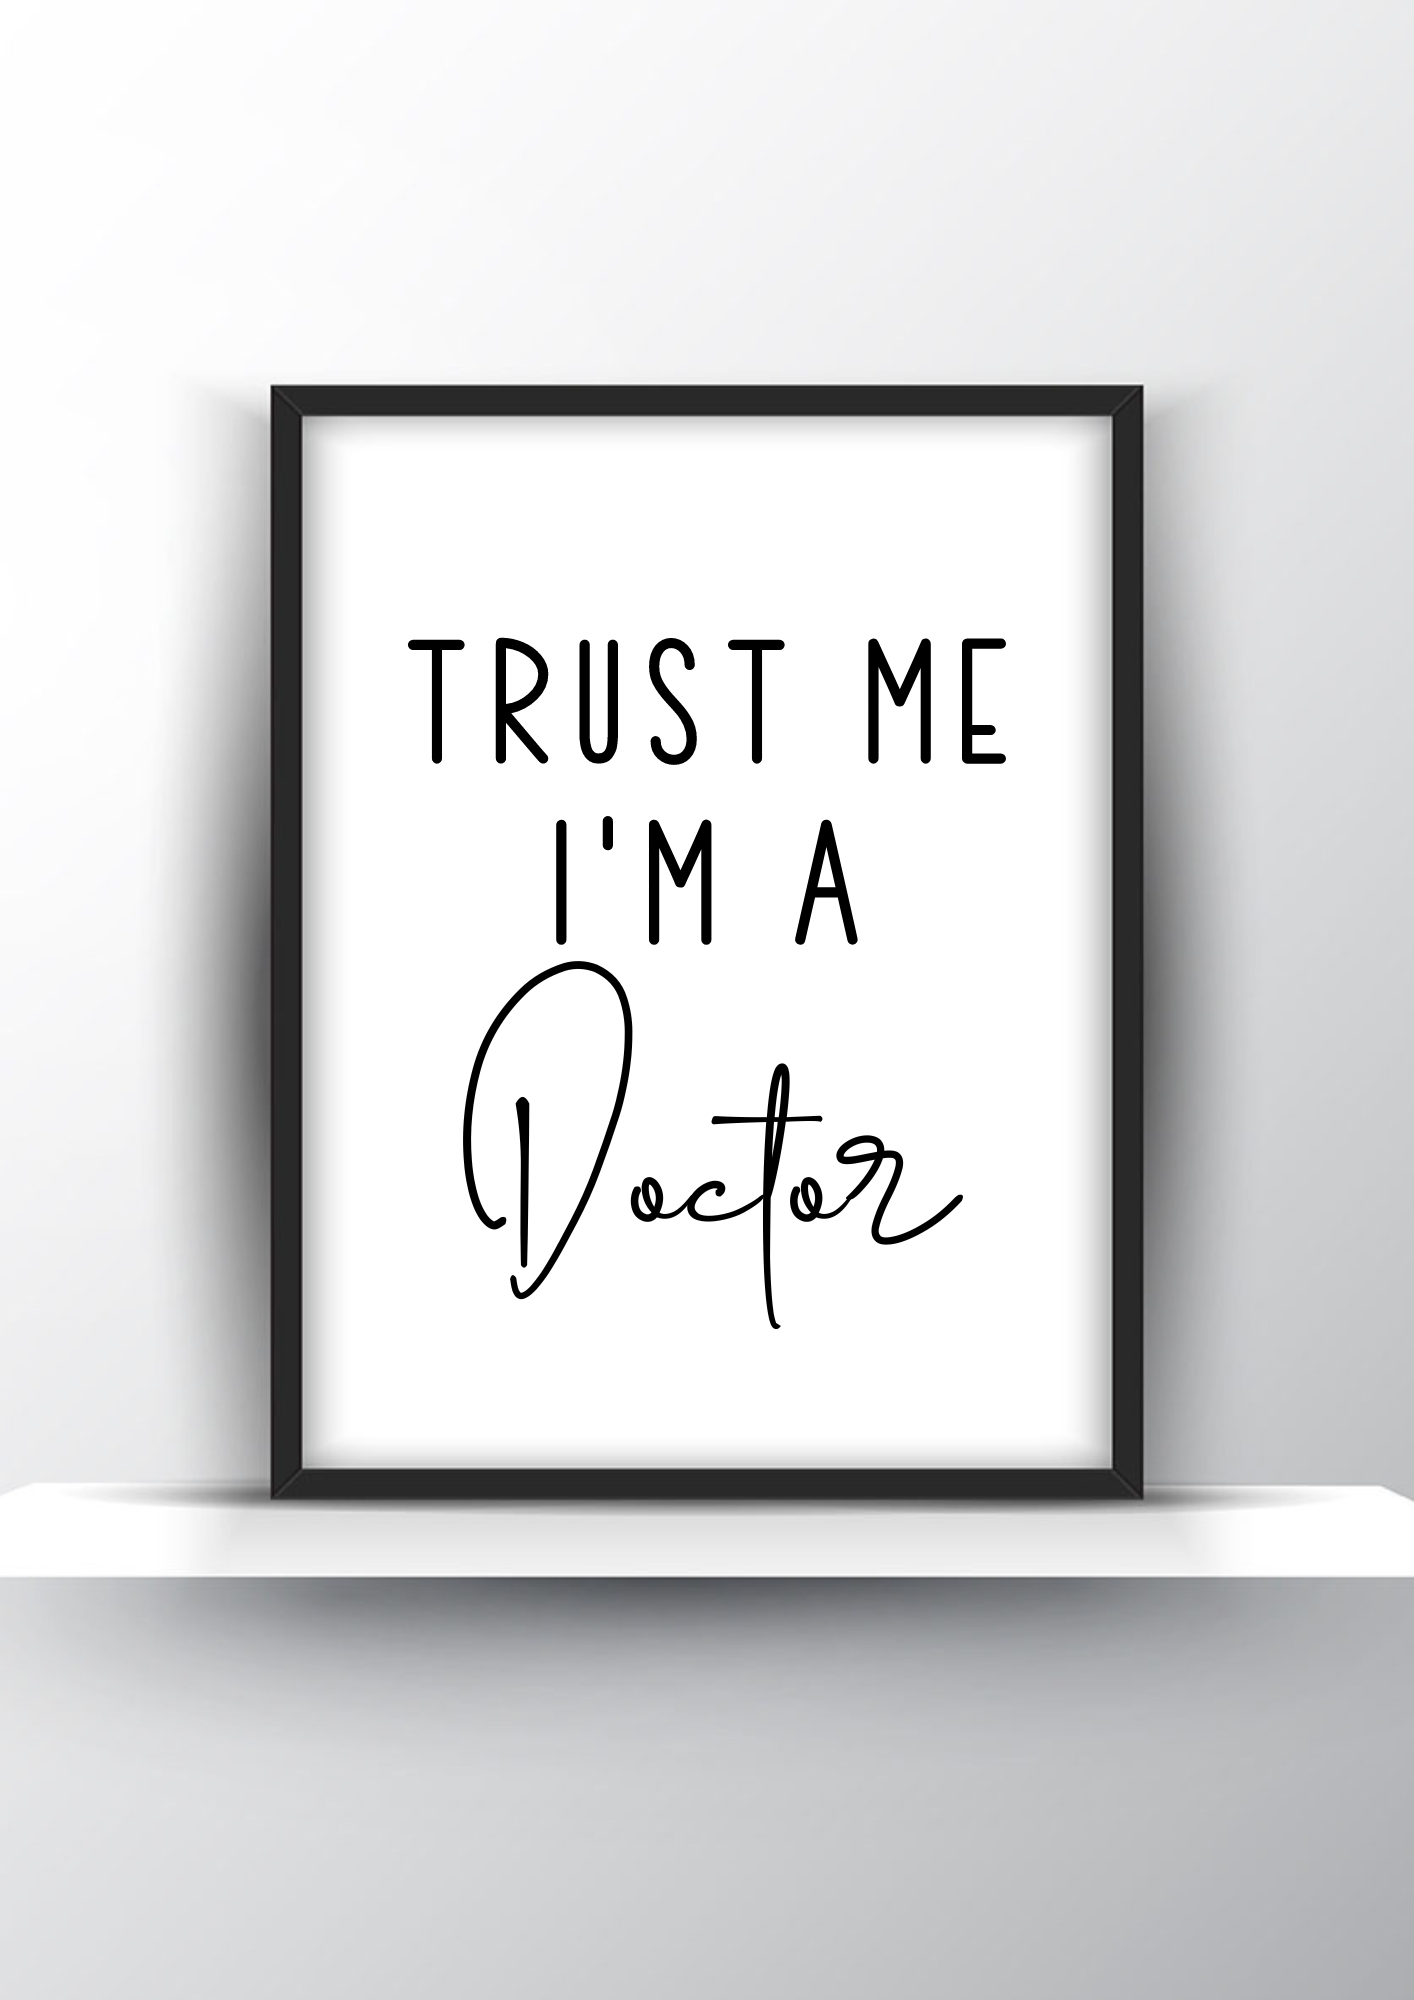 Trust me I'm a Doctor Printable Wall Art - Funny Doctor Gift - Home Decor - Digital Download